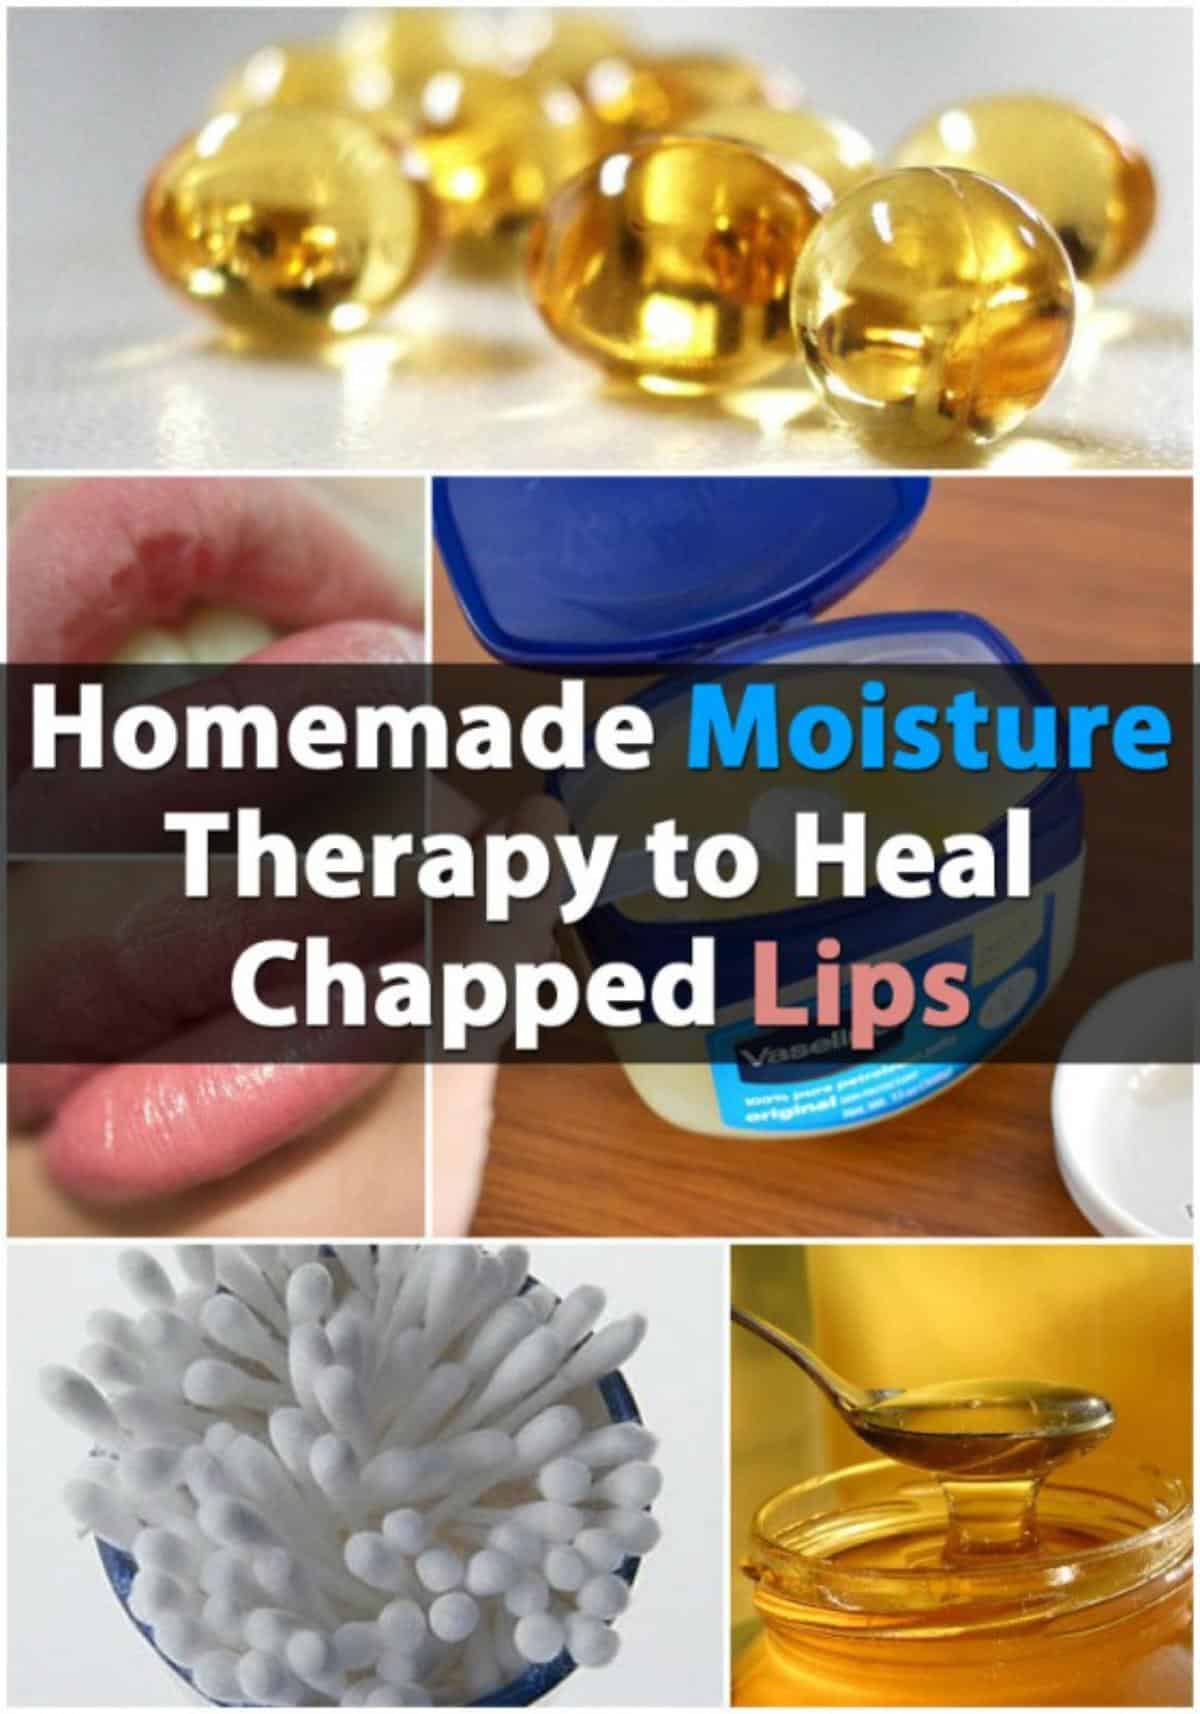 Homemade Moisture Therapy To Heal Chapped Lips pinterest image.